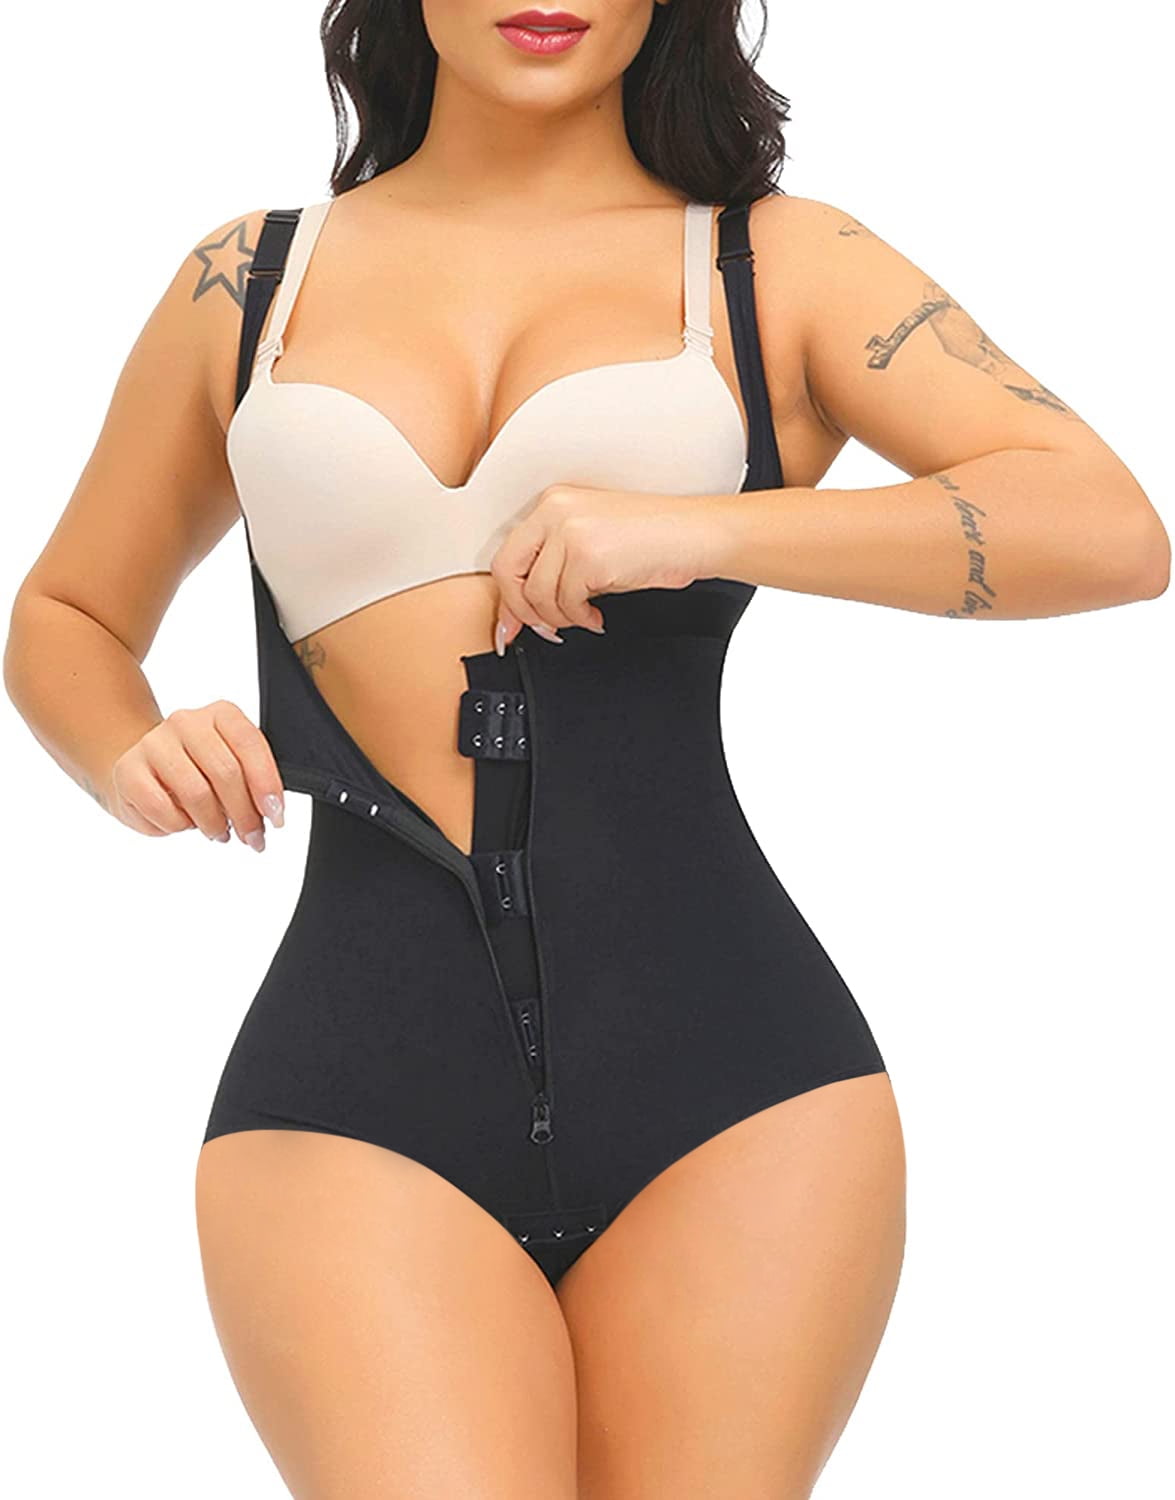 Fajas Colombianas Waist Trainer Body Shaper Tummy Slimming Bbl Corset  Bodysuit Weight Loss Products For Women size M Color Black